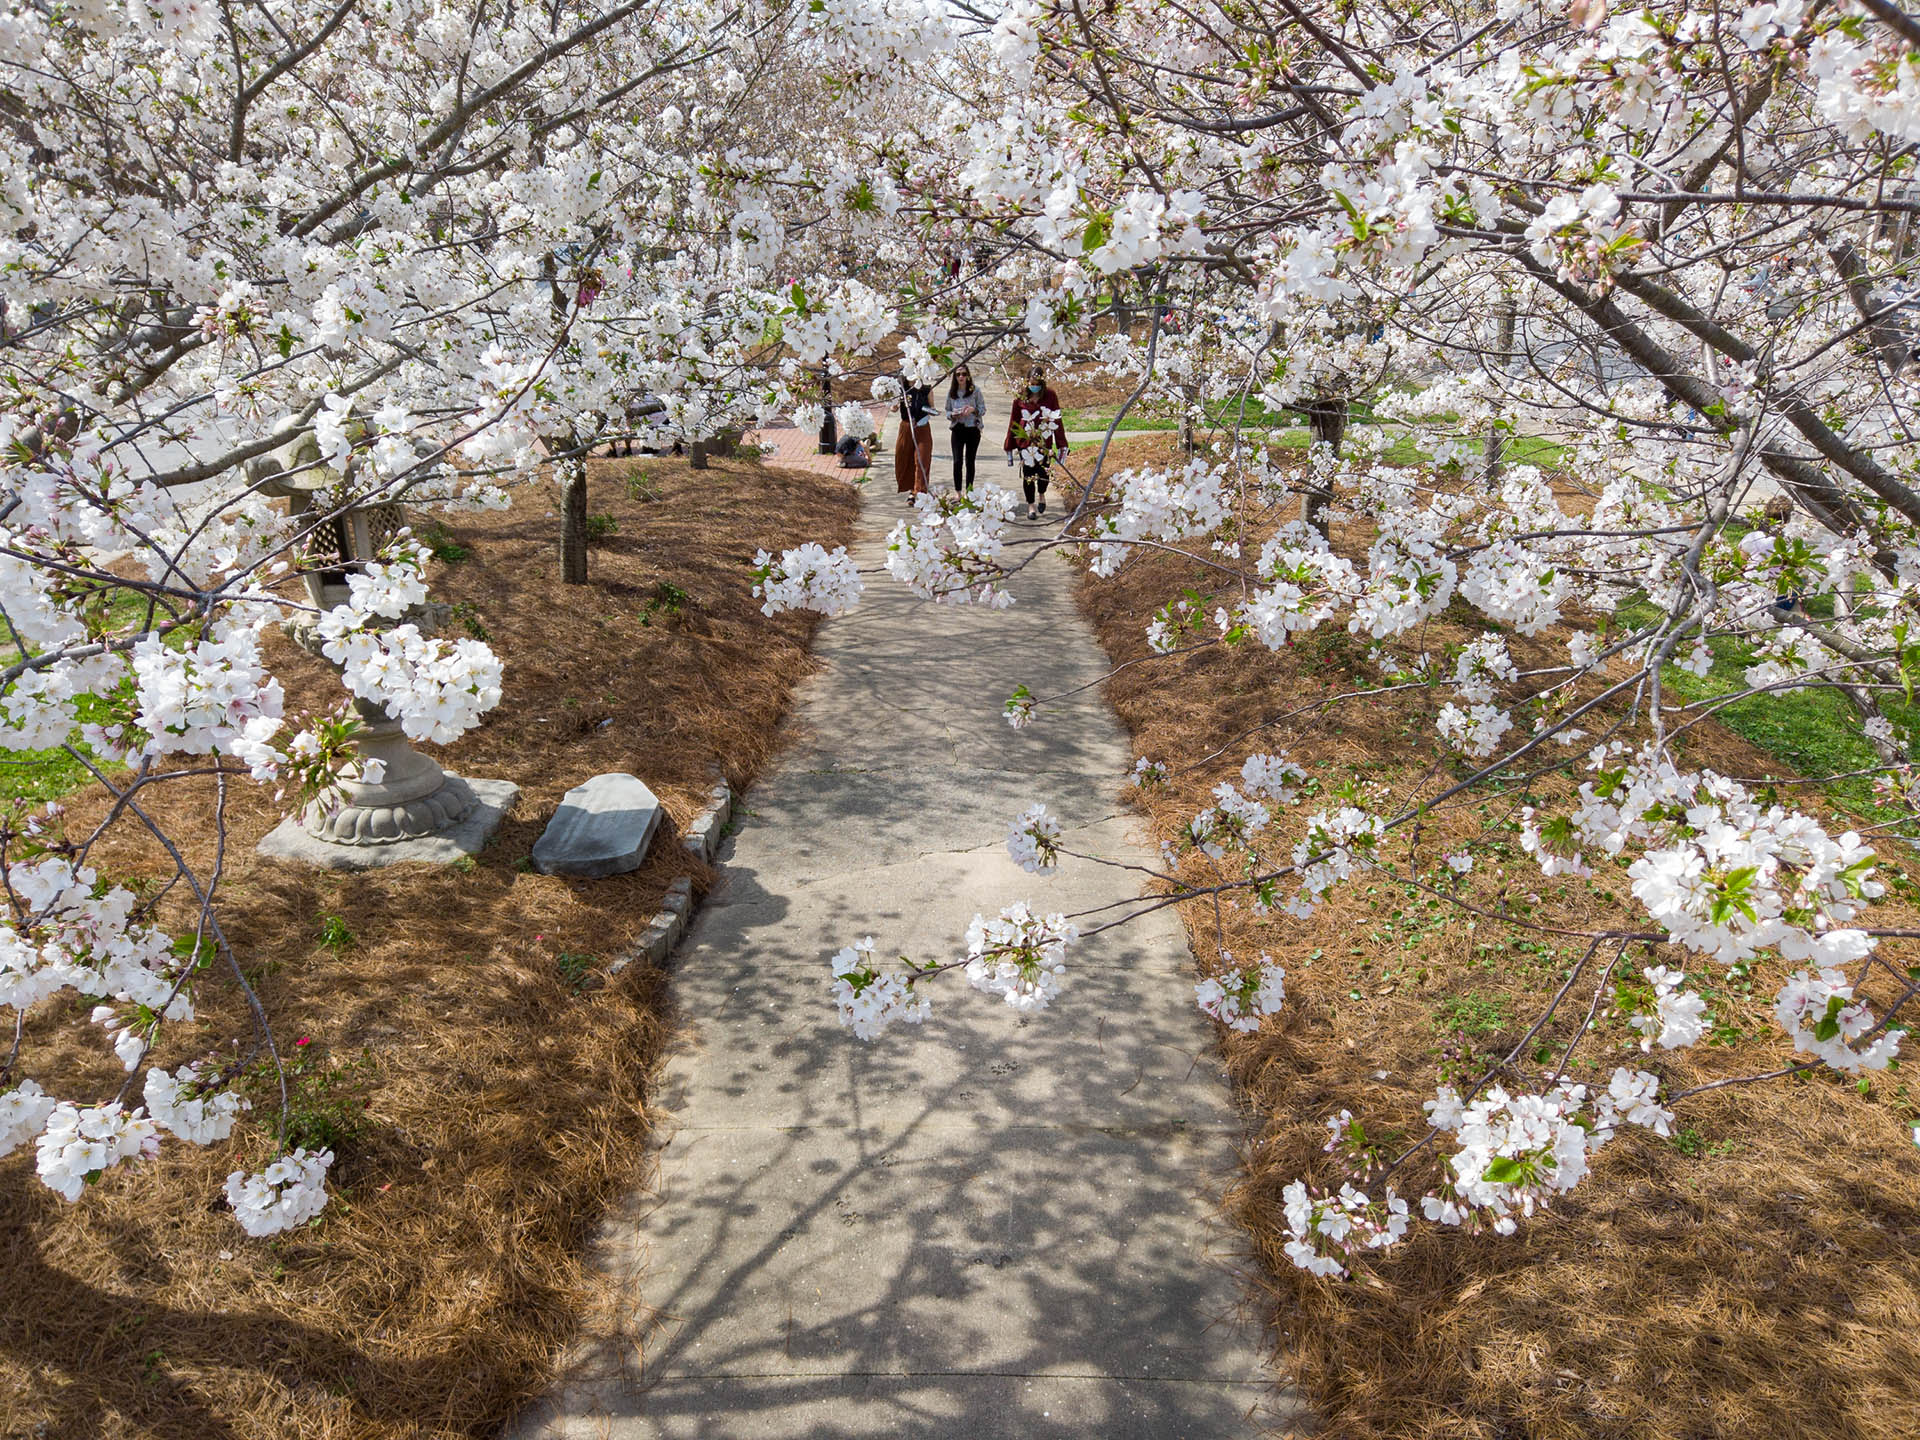 Cherry Blossom Festival Announces Closure on Friday, March 22